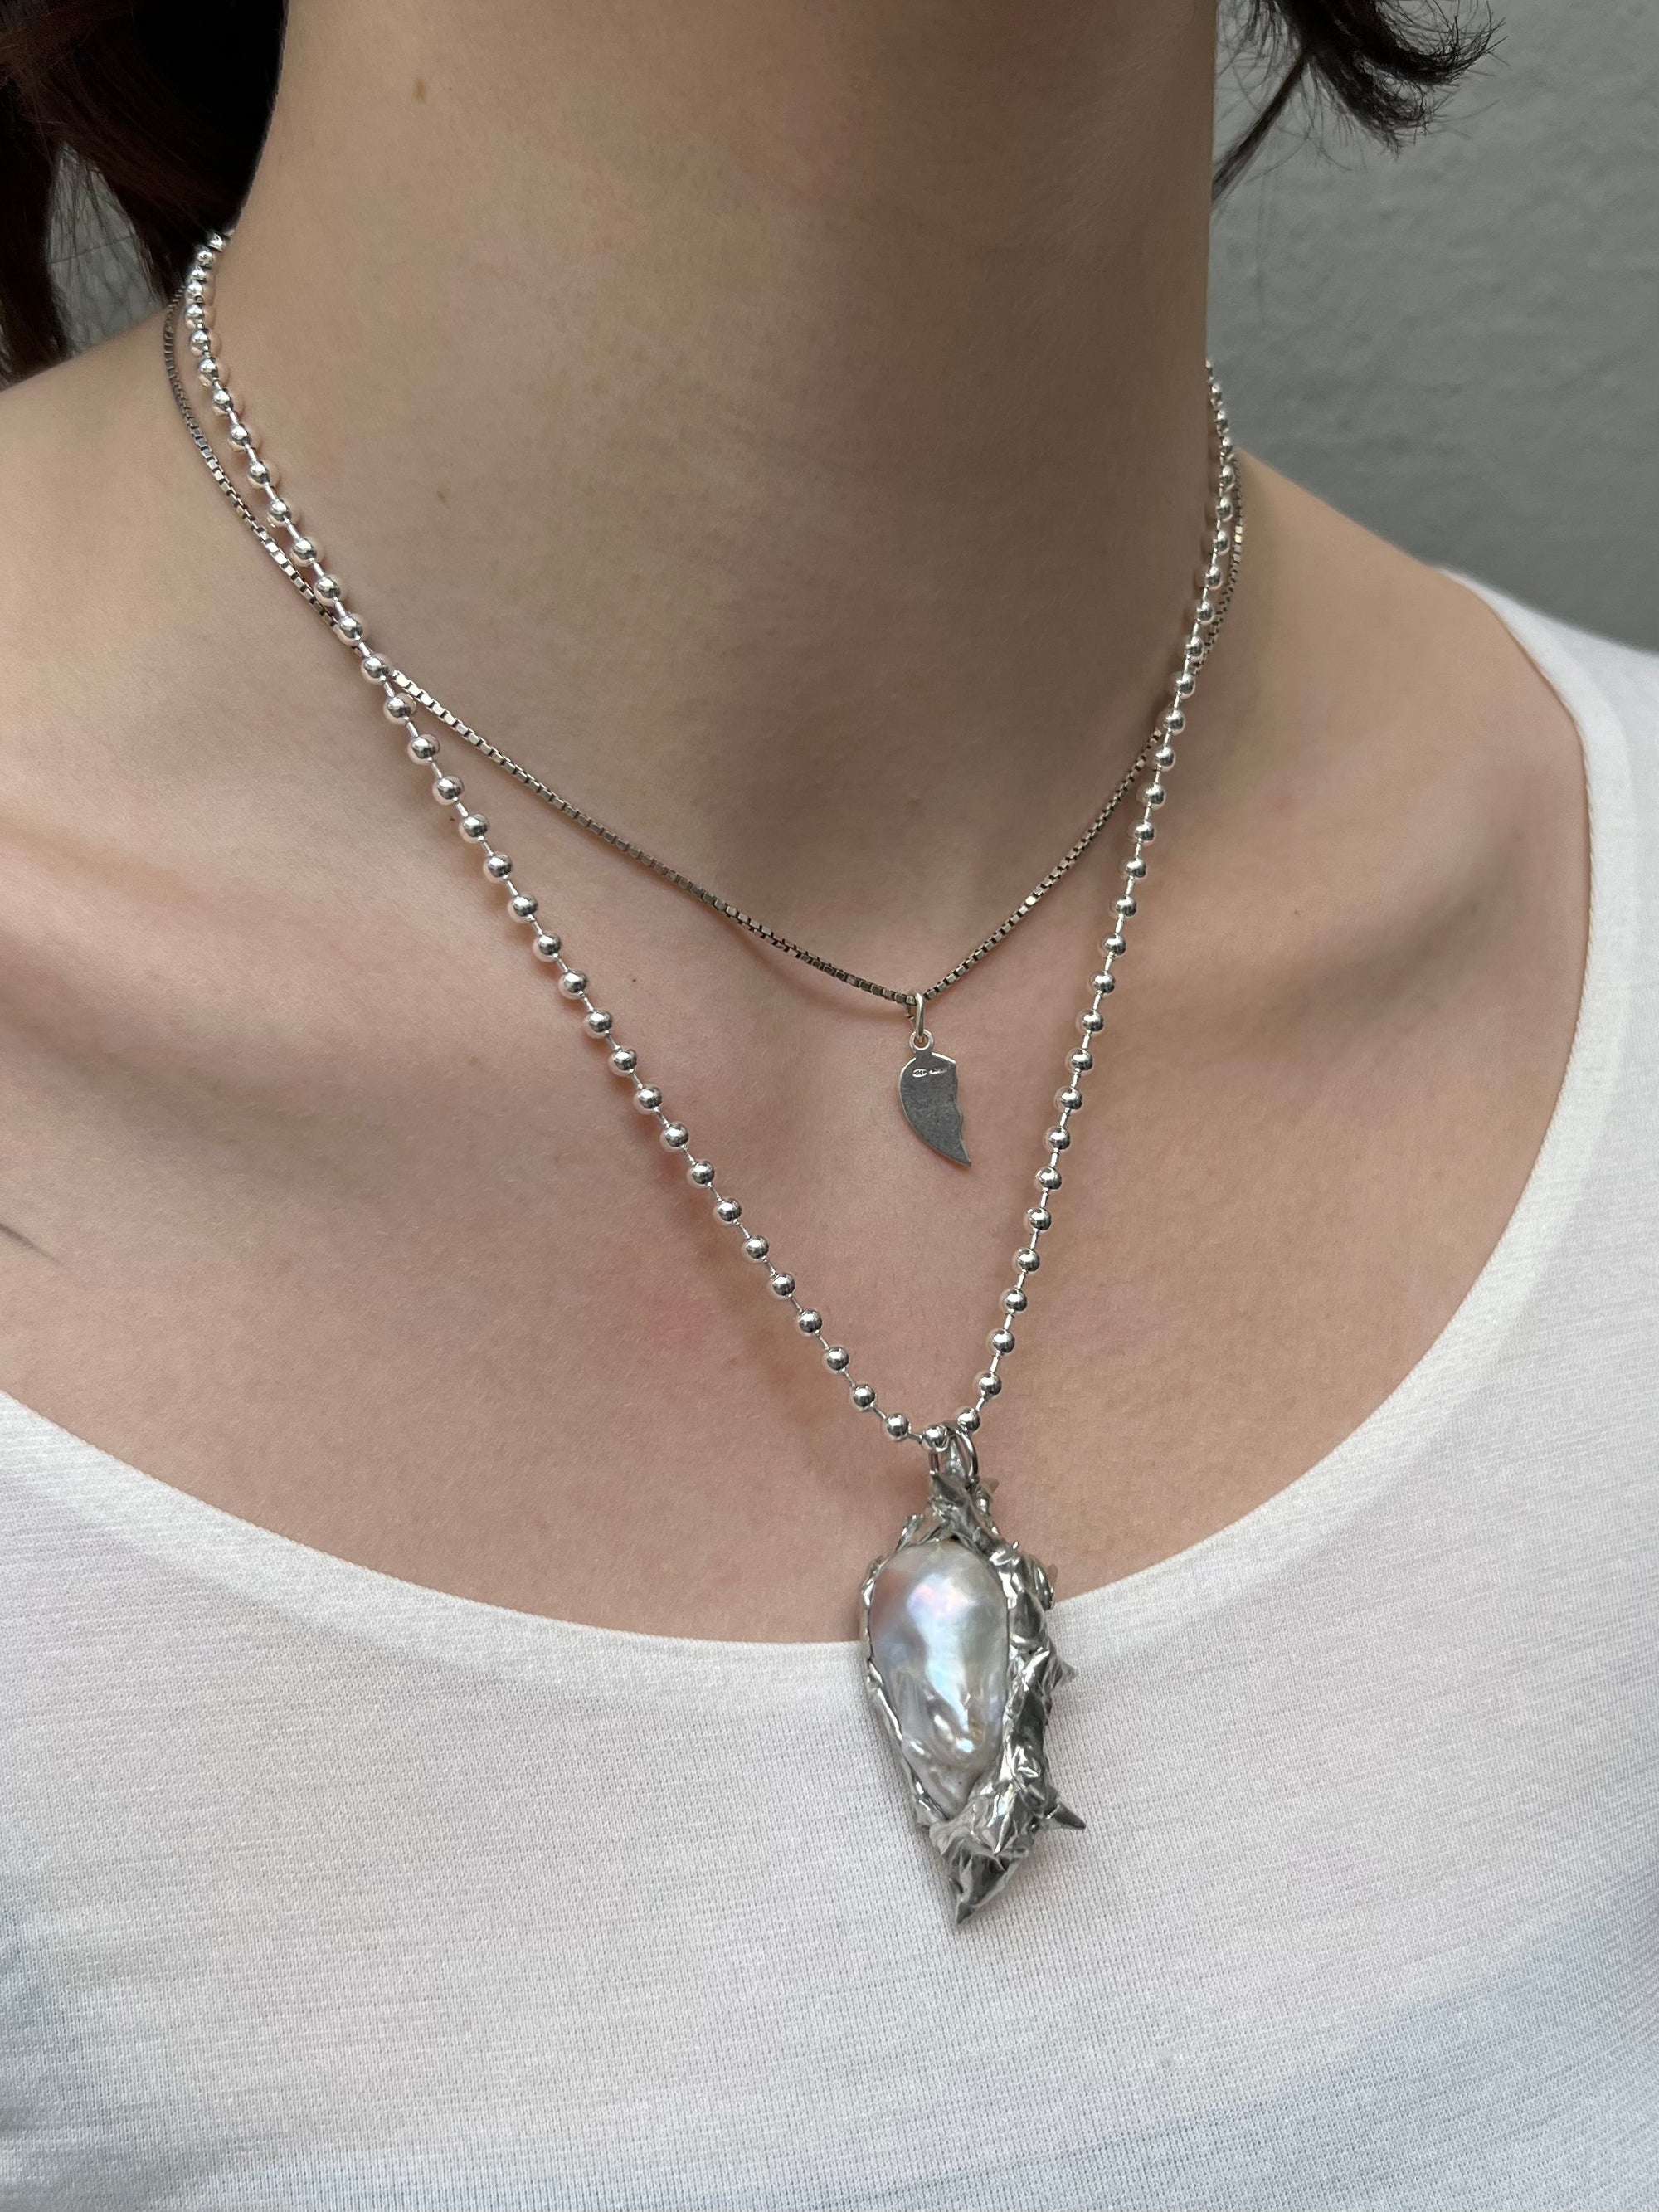 Xullery Dragon Egg Chain Necklace